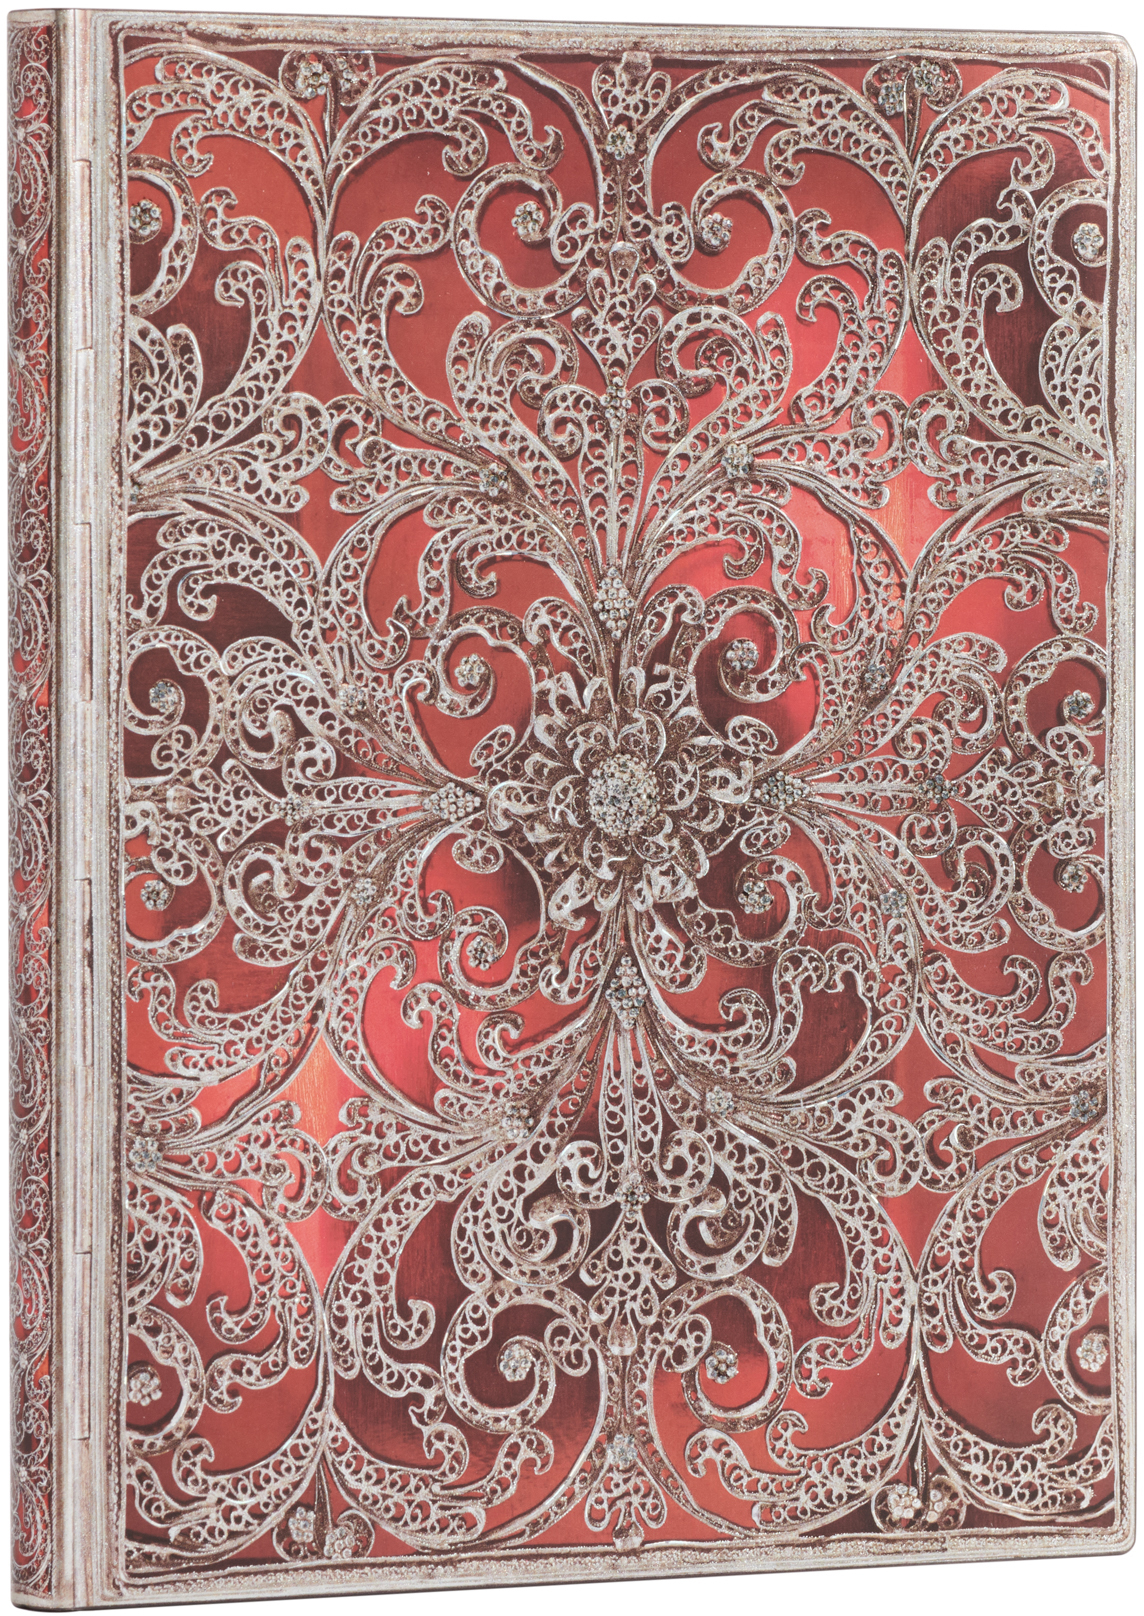 PAPERBLANKS Carnet de notes Ultra FB9402-9 Granat, blanko 176 pages